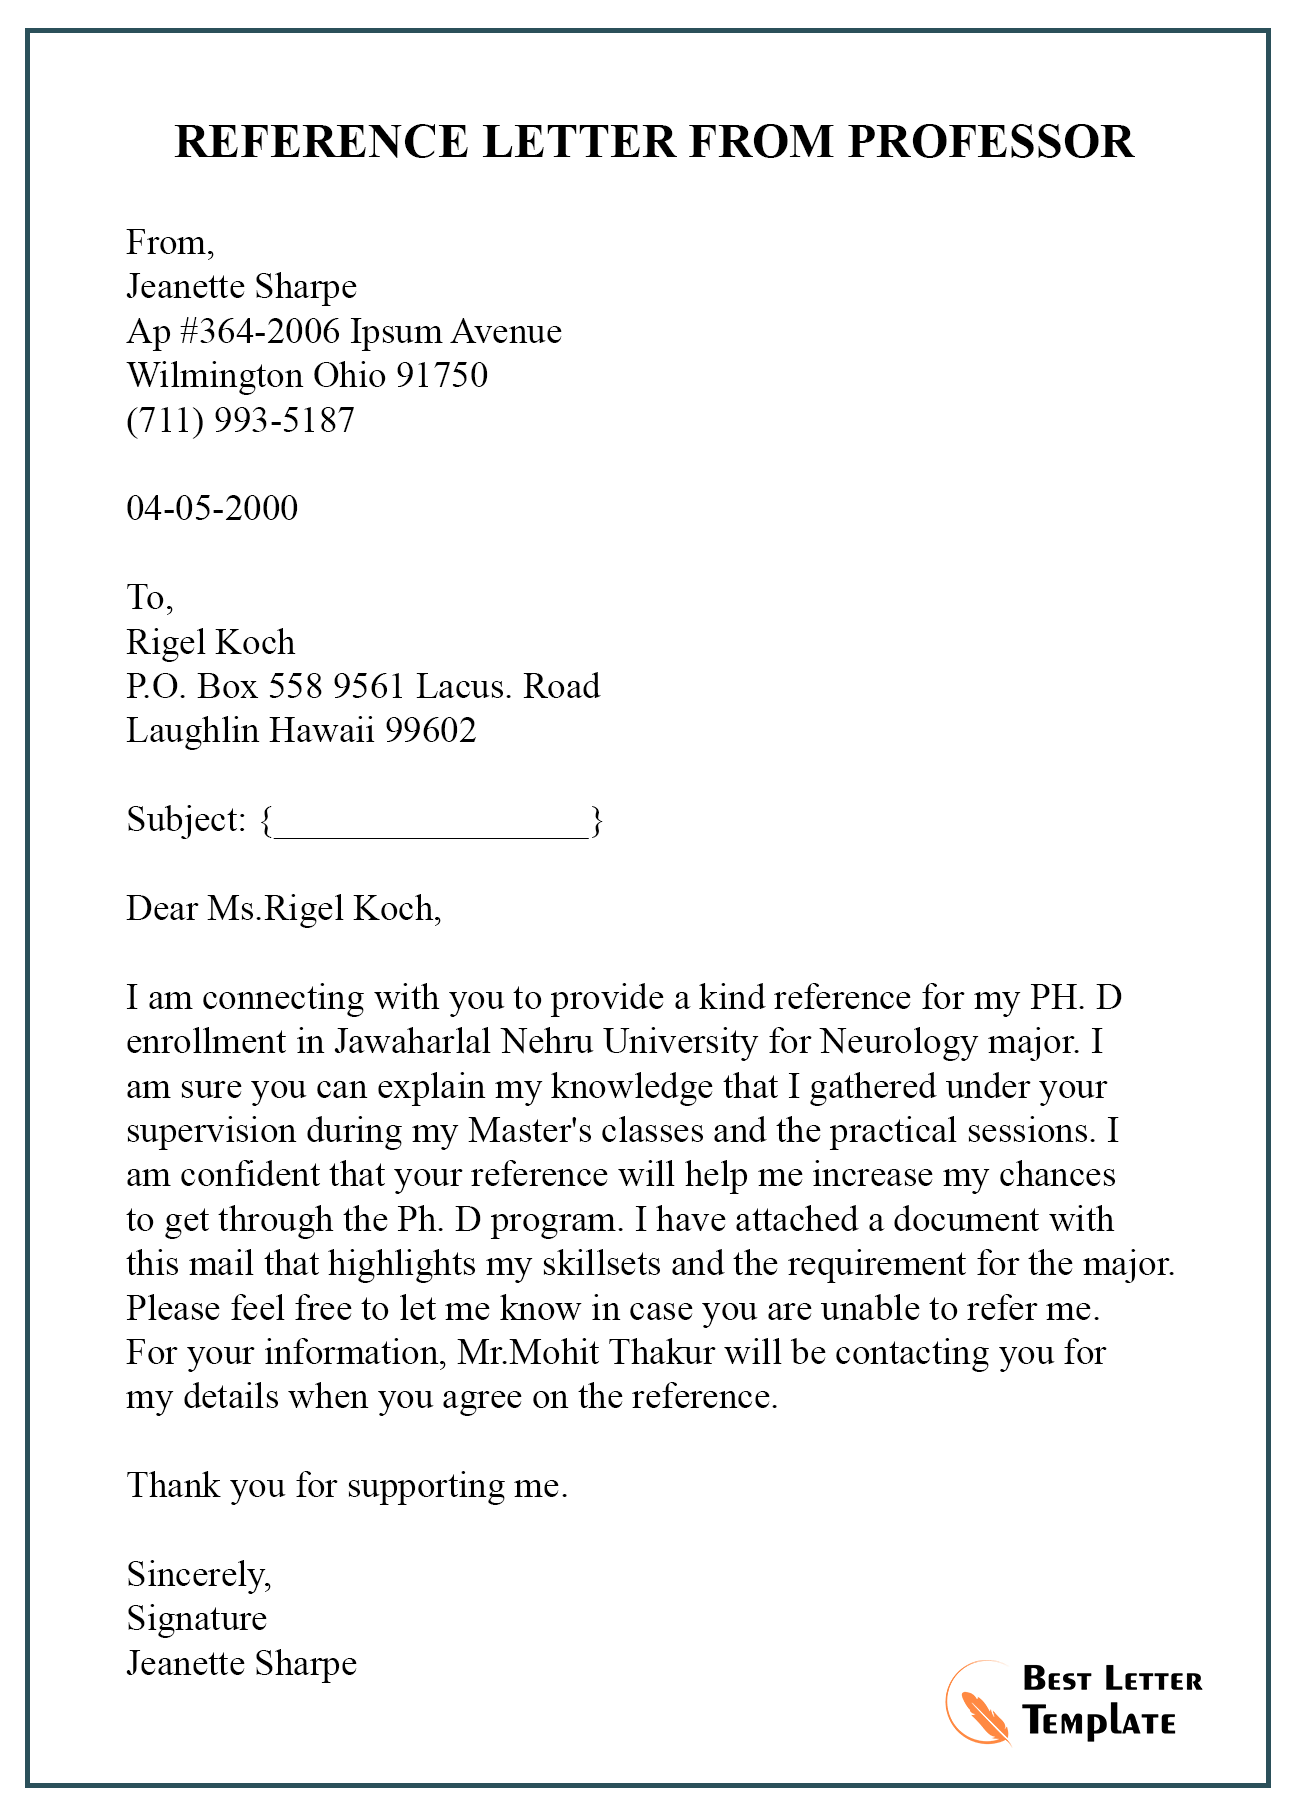 Reference Request Letter Example from bestlettertemplate.com